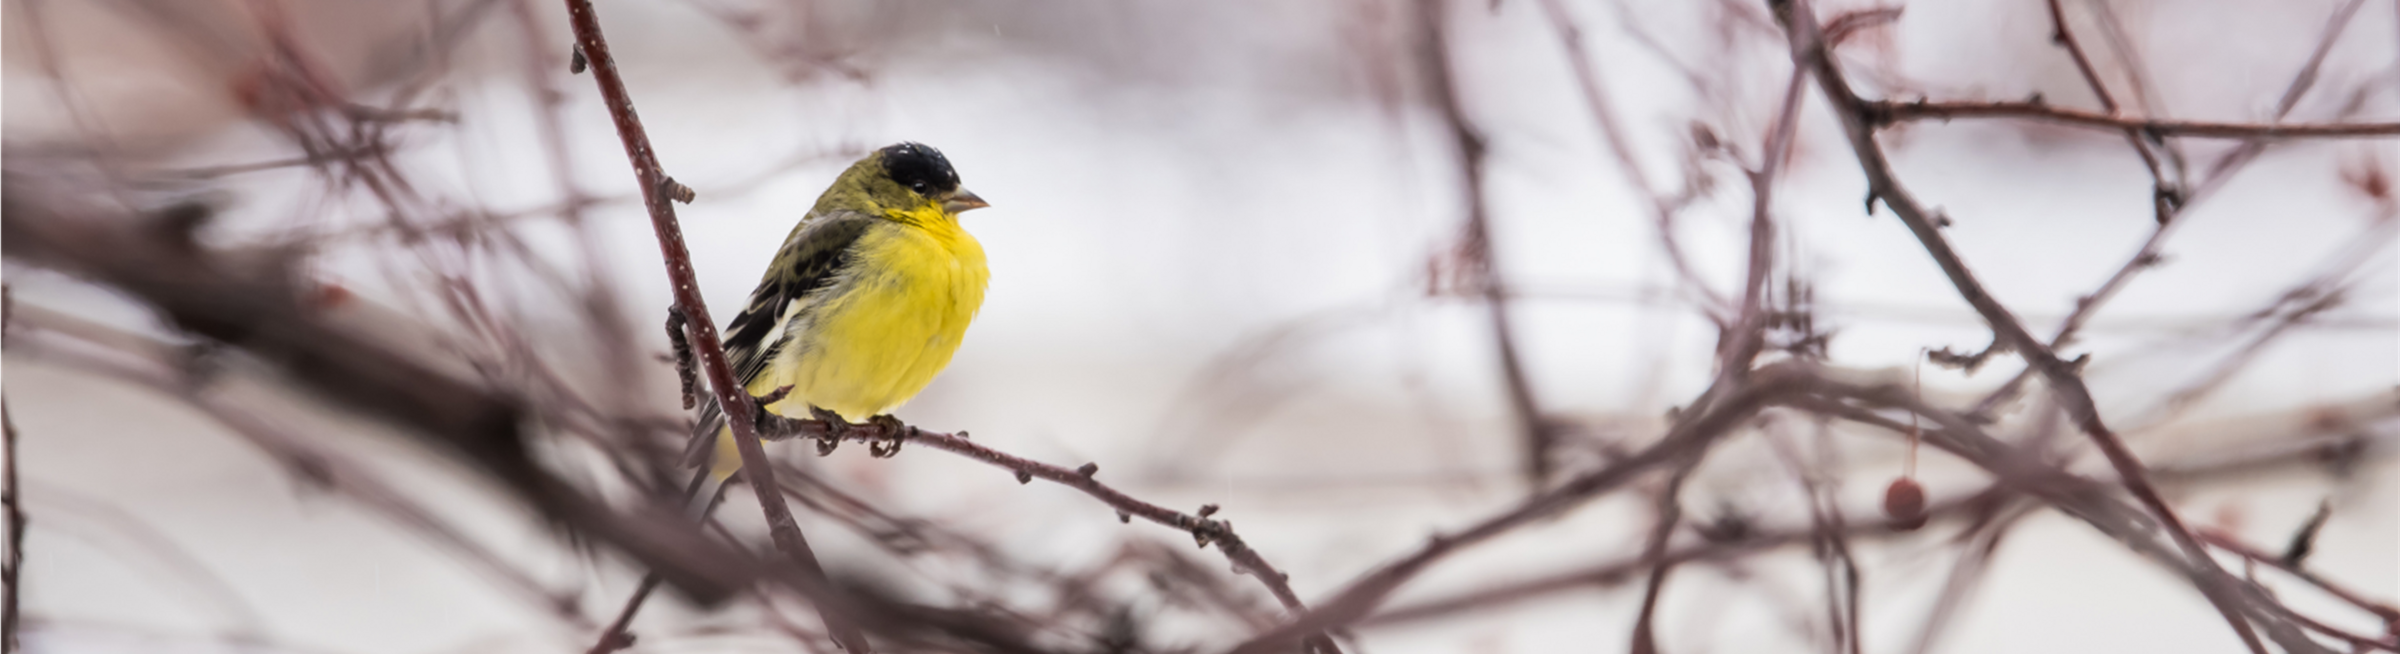 A Lesser Goldfinch, a small, black and yellow bird, perches on a bare branch against a snowy backdrop.